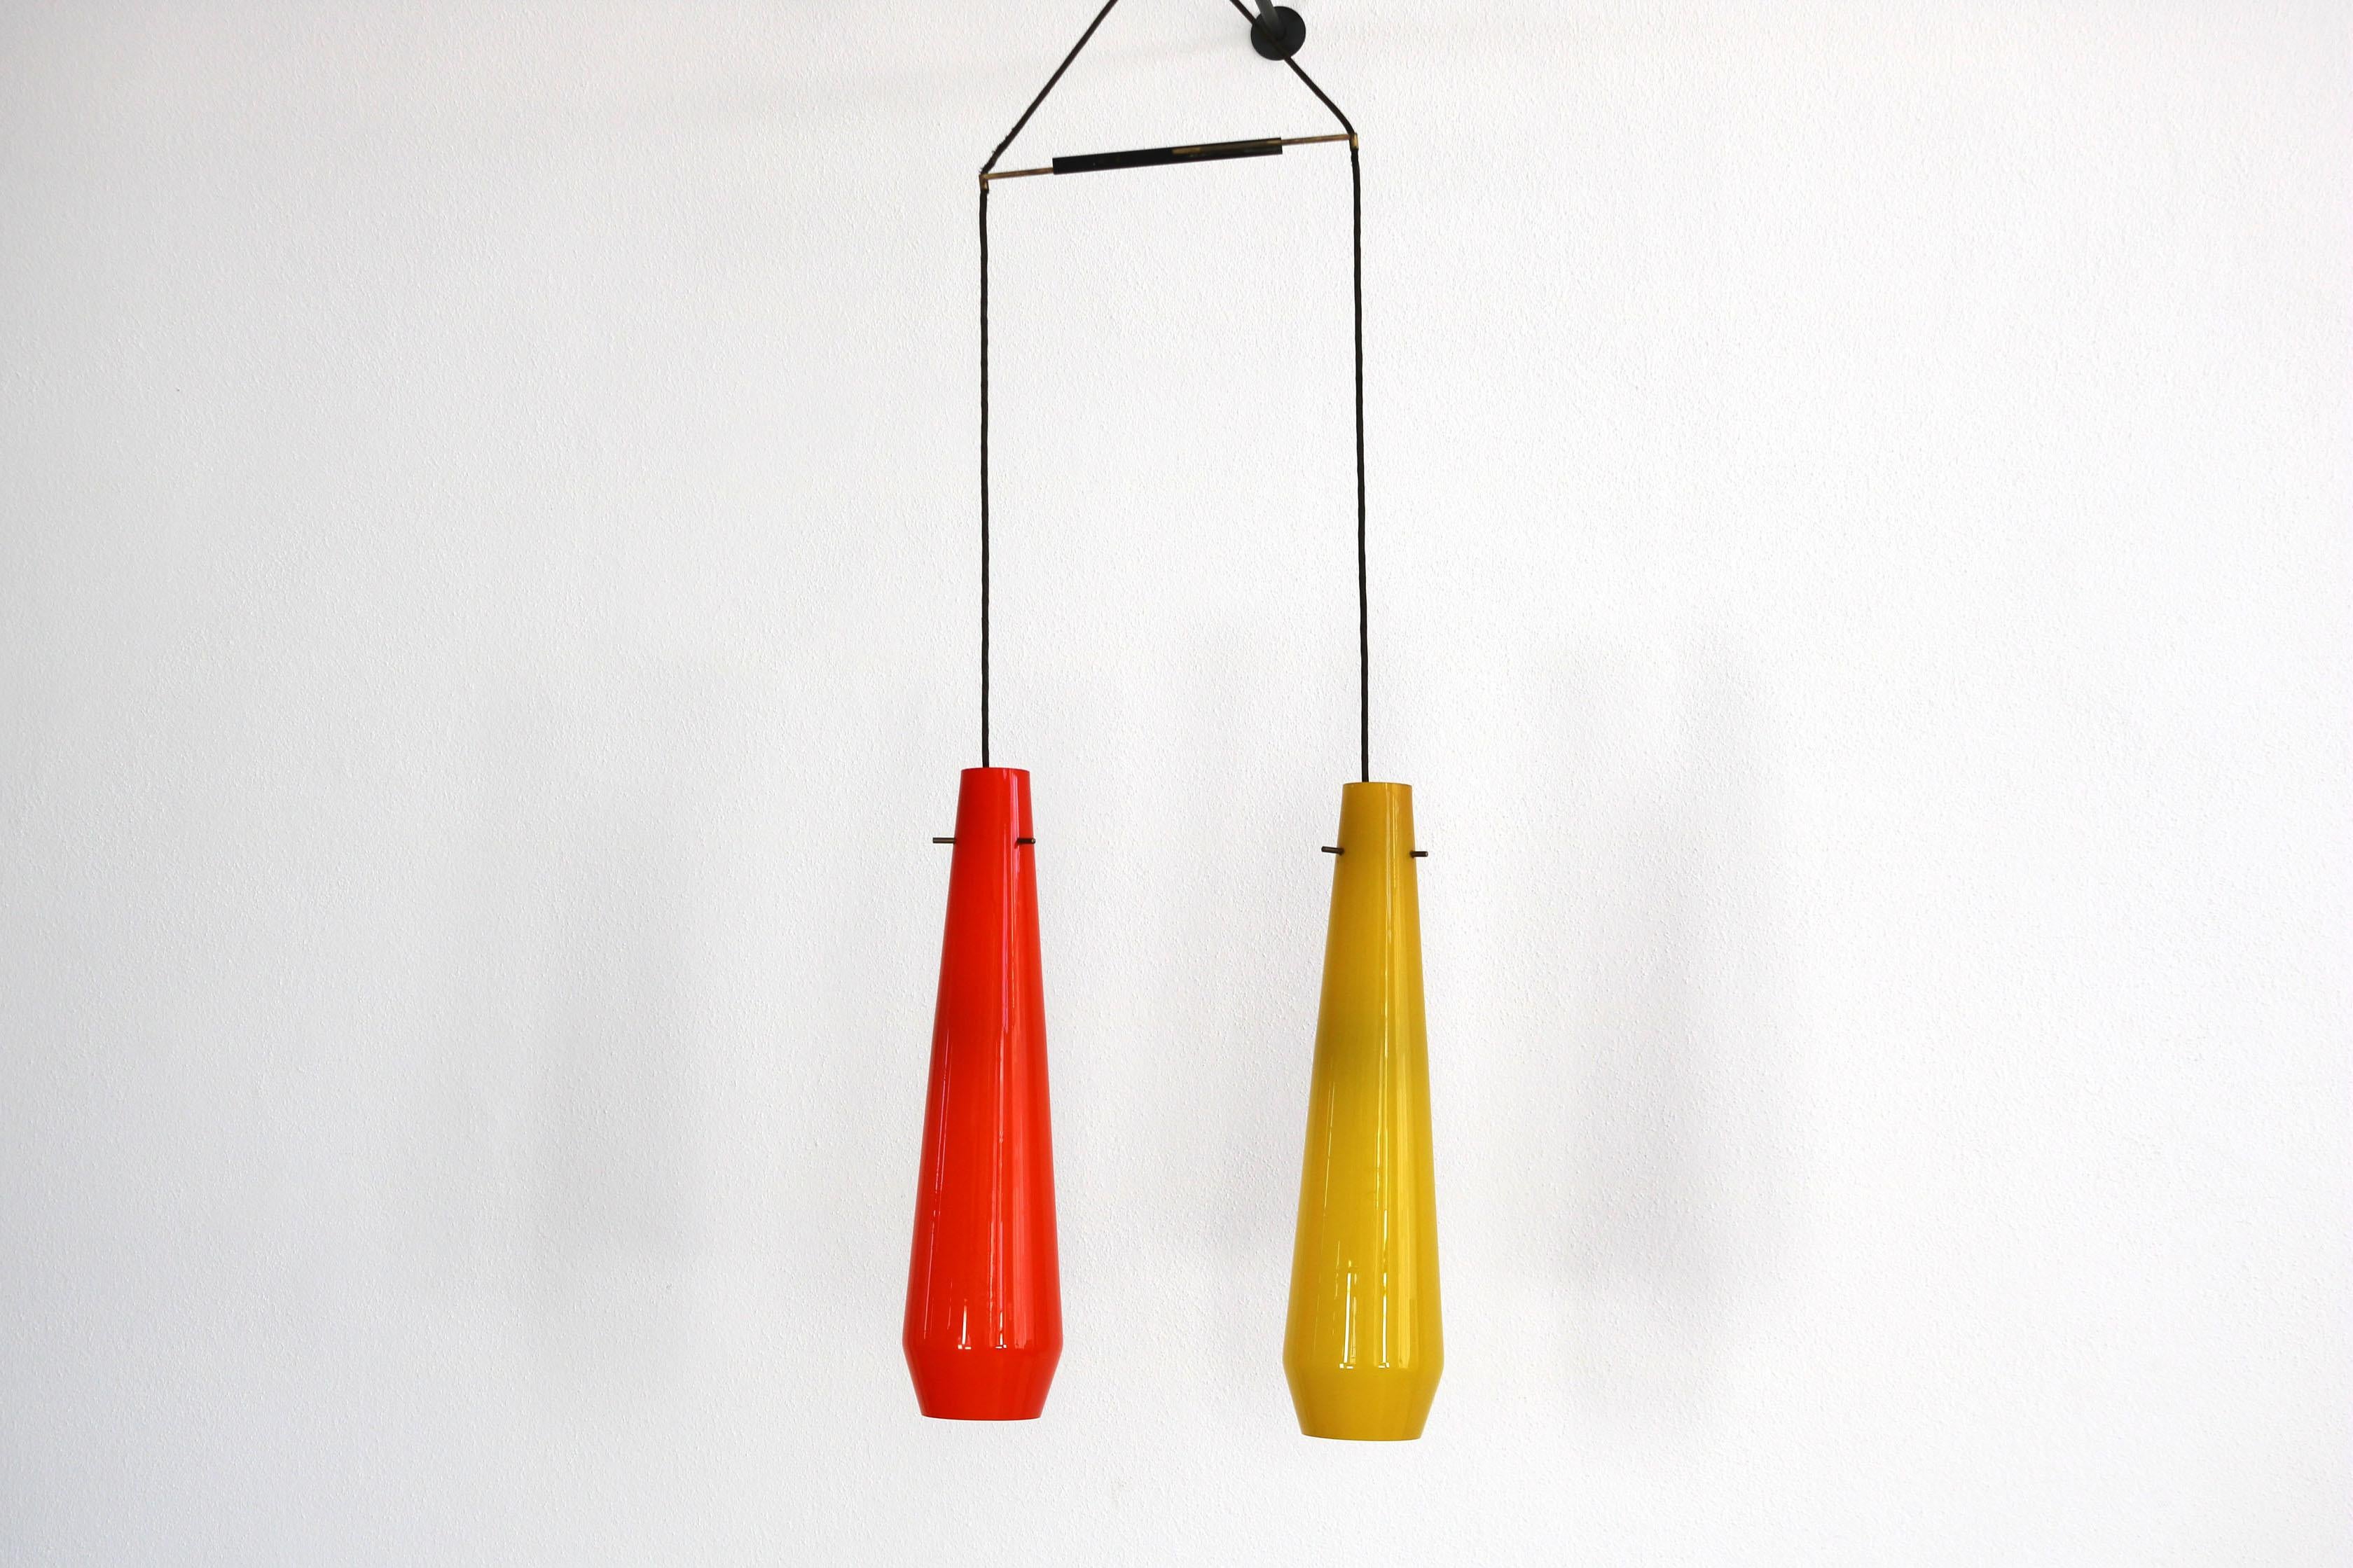 Pendant lamp from the Italian 1950s with two mouth-blown glass shades in yellow and orange. Total height currently 136 cm. One glass shade is 40 cm high and has a diameter of 16 cm. The distance holder is made of iron and patinated brass.